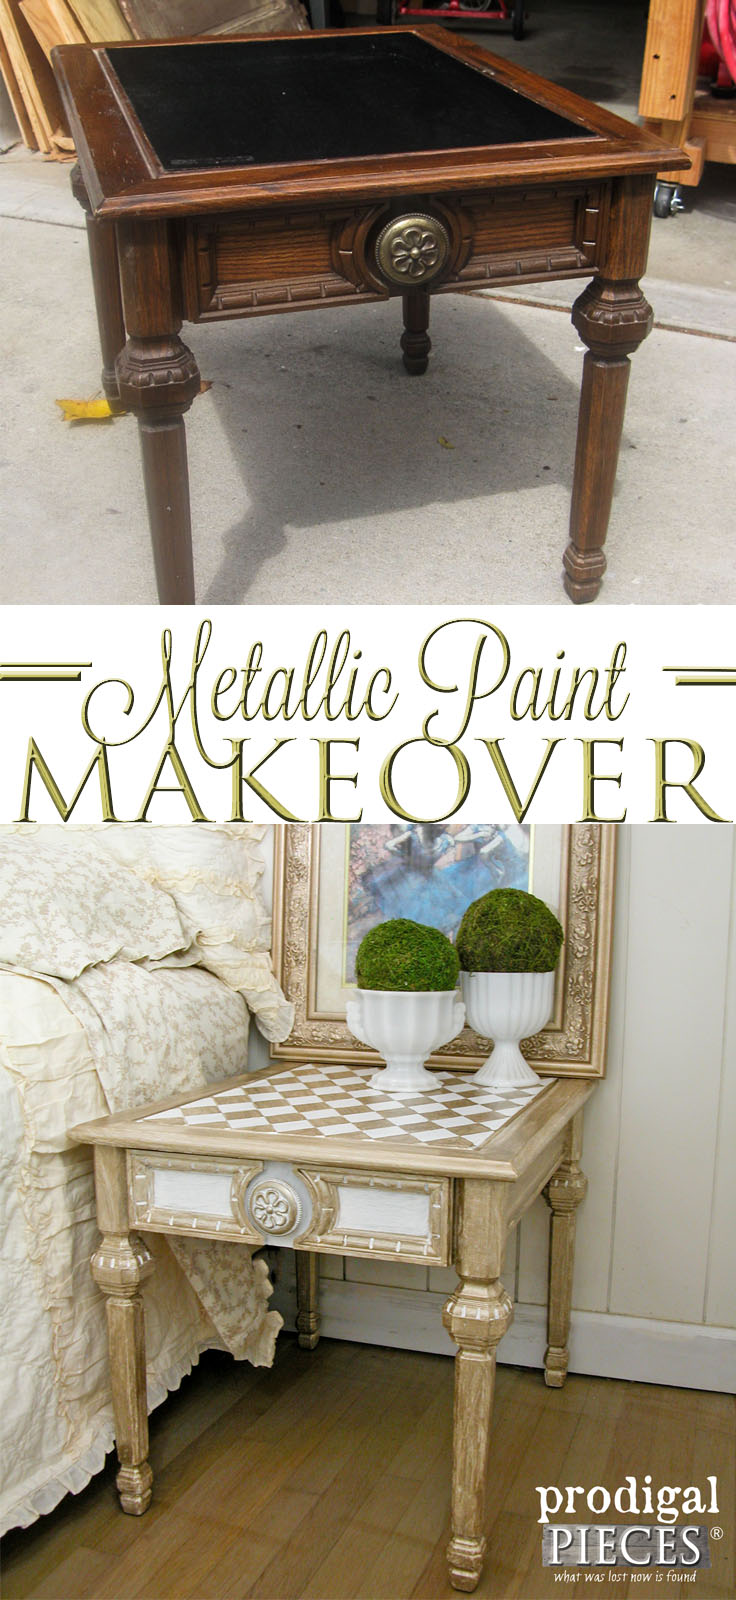 Refresh Your Outdated Furniture with Metallic Paint | Harlequin Design and Style by Prodigal Pieces | prodigalpieces.com